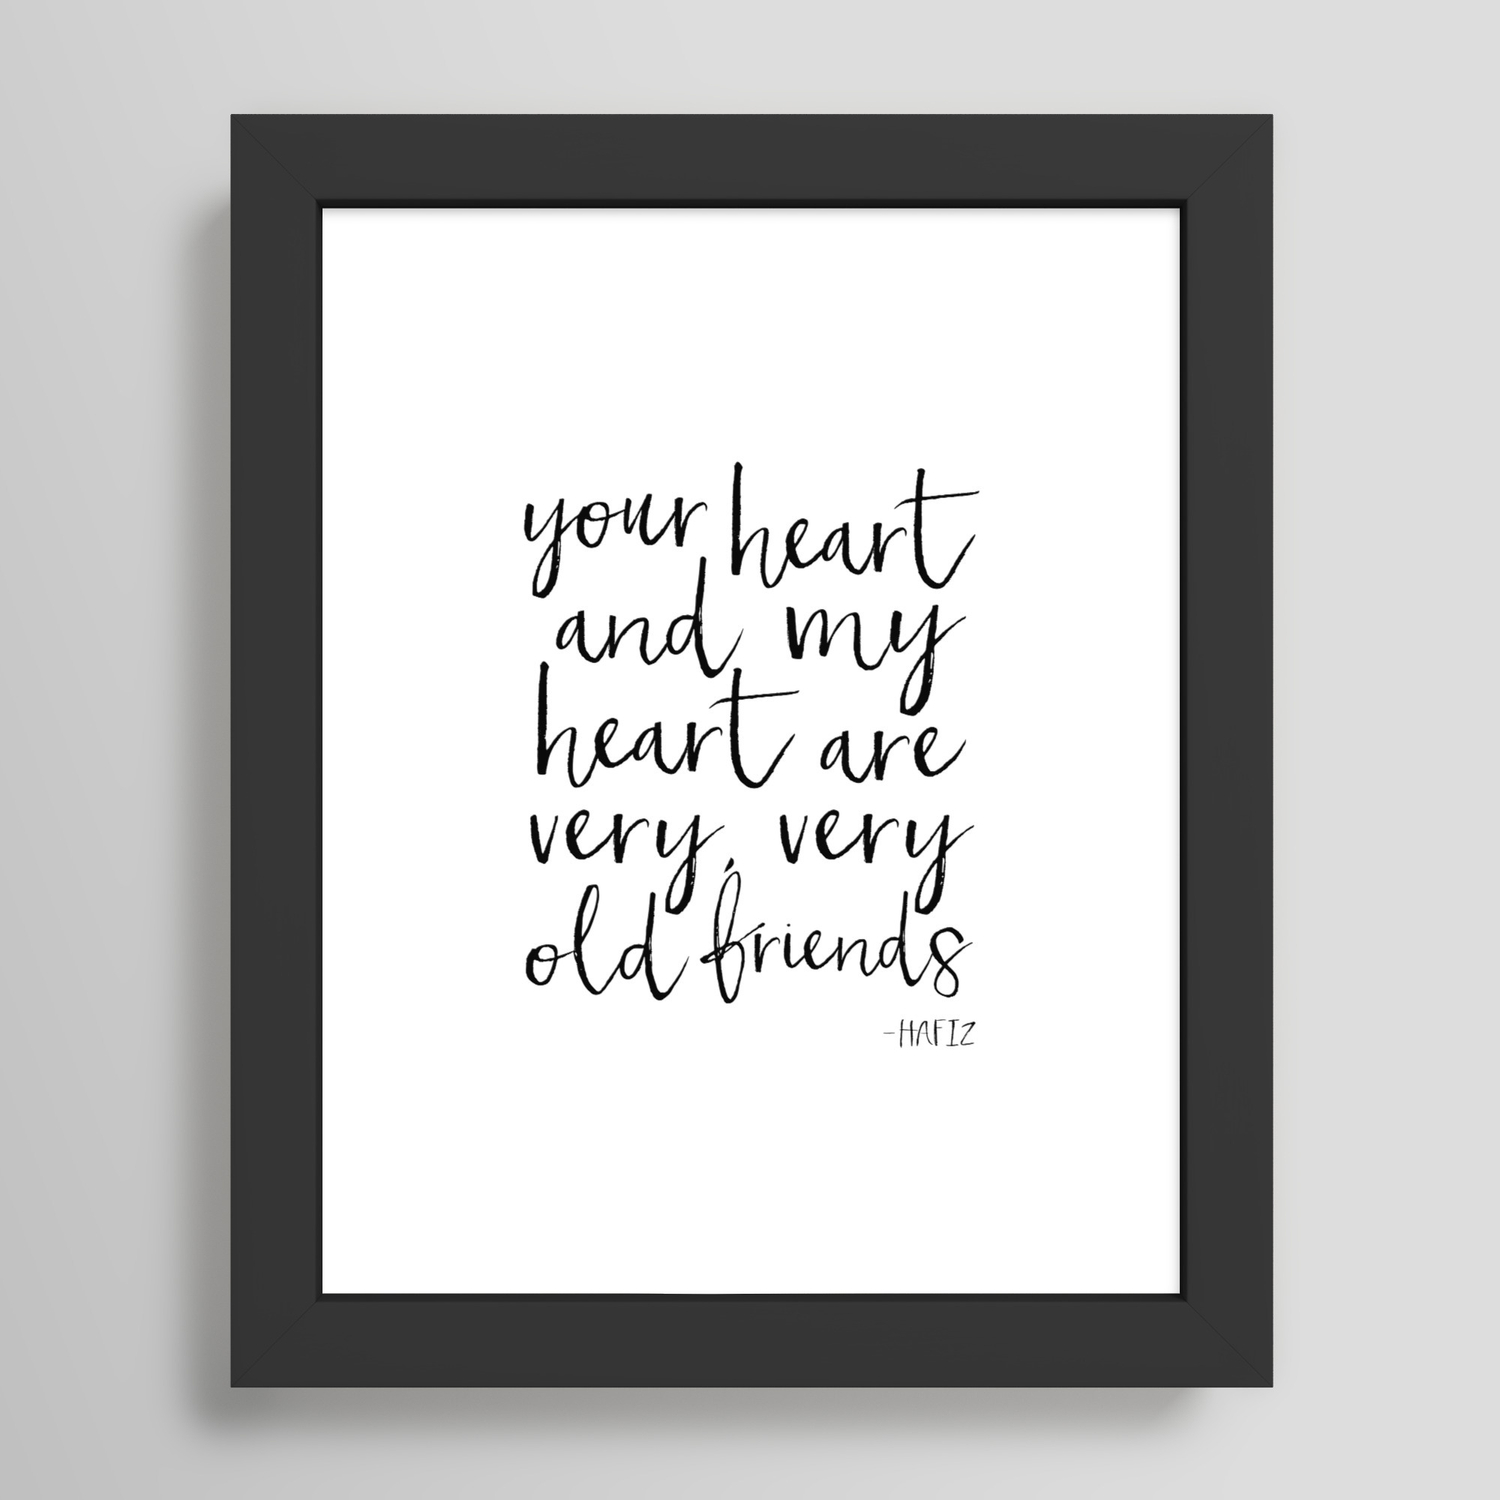 YoUR HeaRT aND MY HeaRT aRe VeRY VeRY oLD FRieNDS Hafiz beautiful words on wood Solid wood art / art block WiLDWoRDS